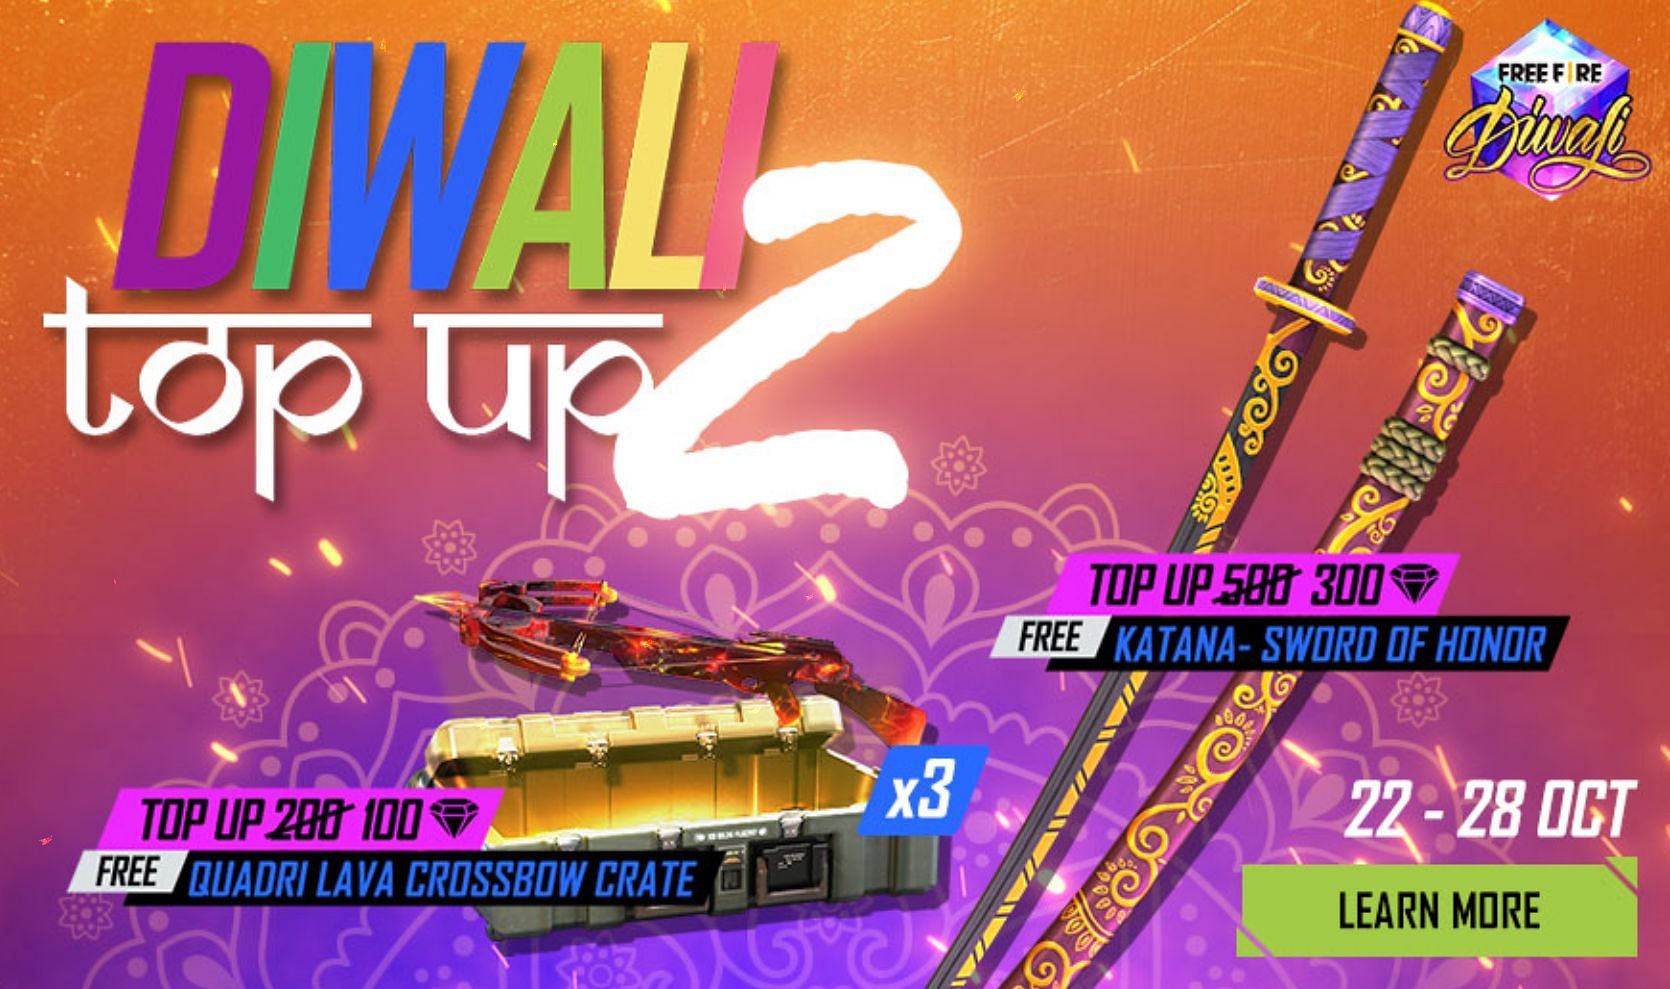 Diwali Top Up 2 will be available until 28 October (Image via Free Fire)